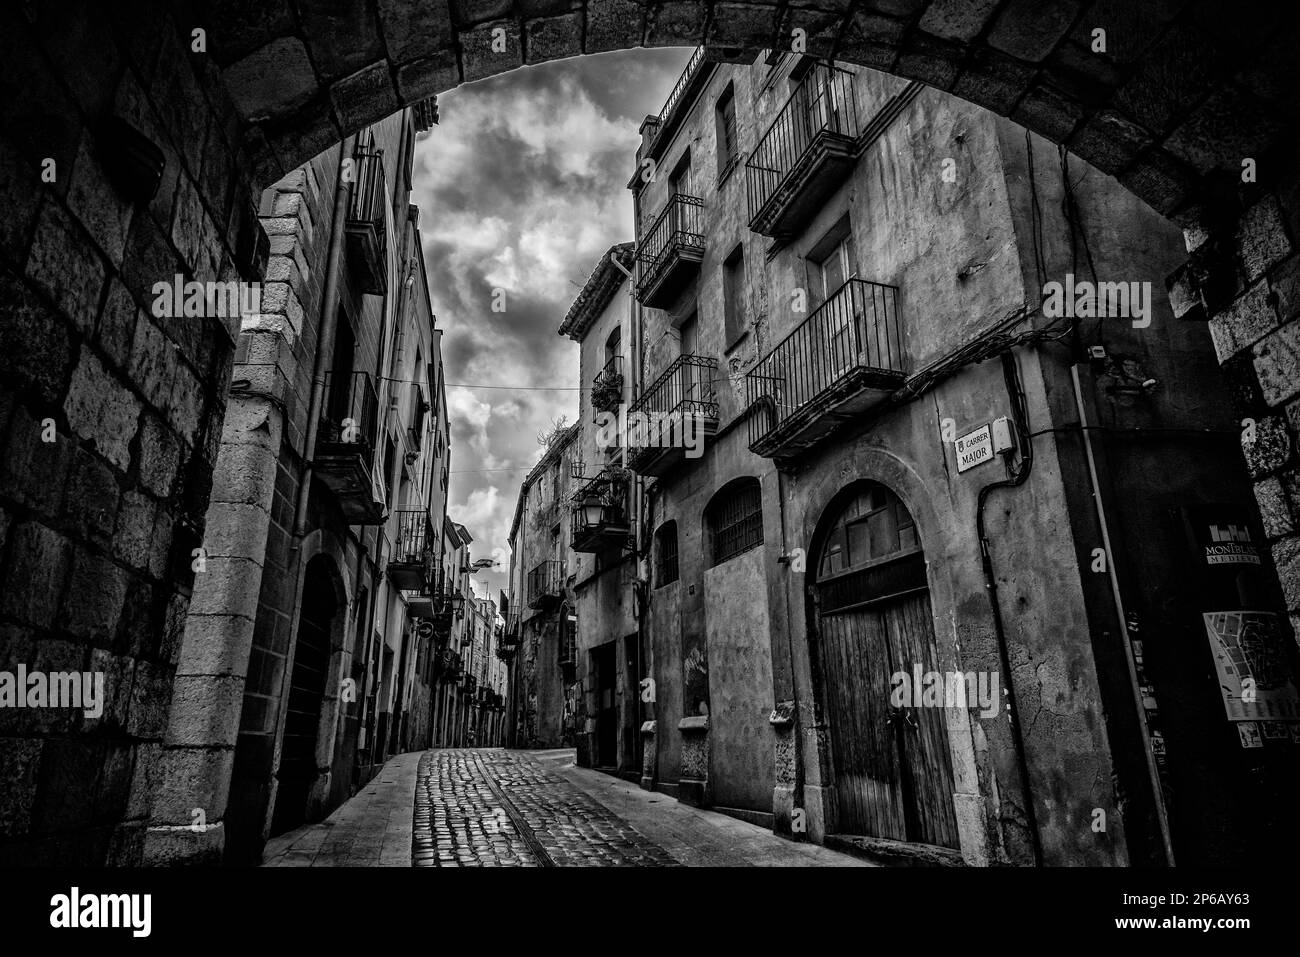 Streets of the historical town of Montblanc, Tarragona, Catalonia, Spain Stock Photo